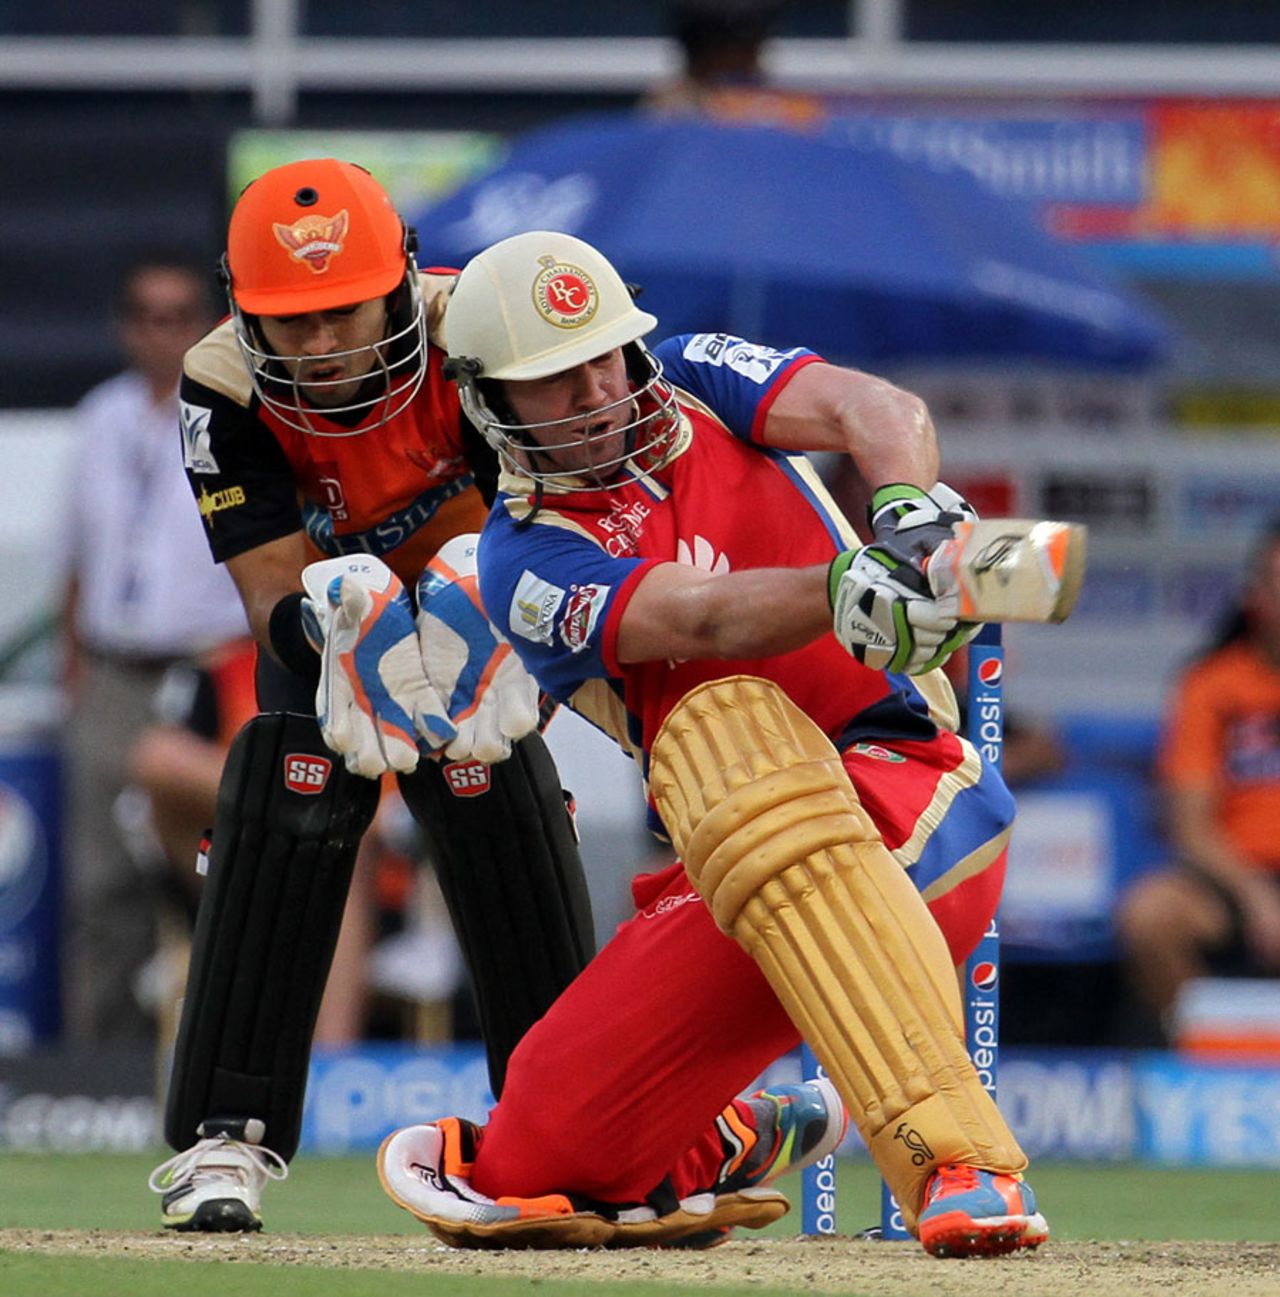 AB de Villiers made a quickfire 29, Sunrisers Hyderabad v Royal Challengers Bangalore, IPL 2014, Hyderabad, May 20, 2014